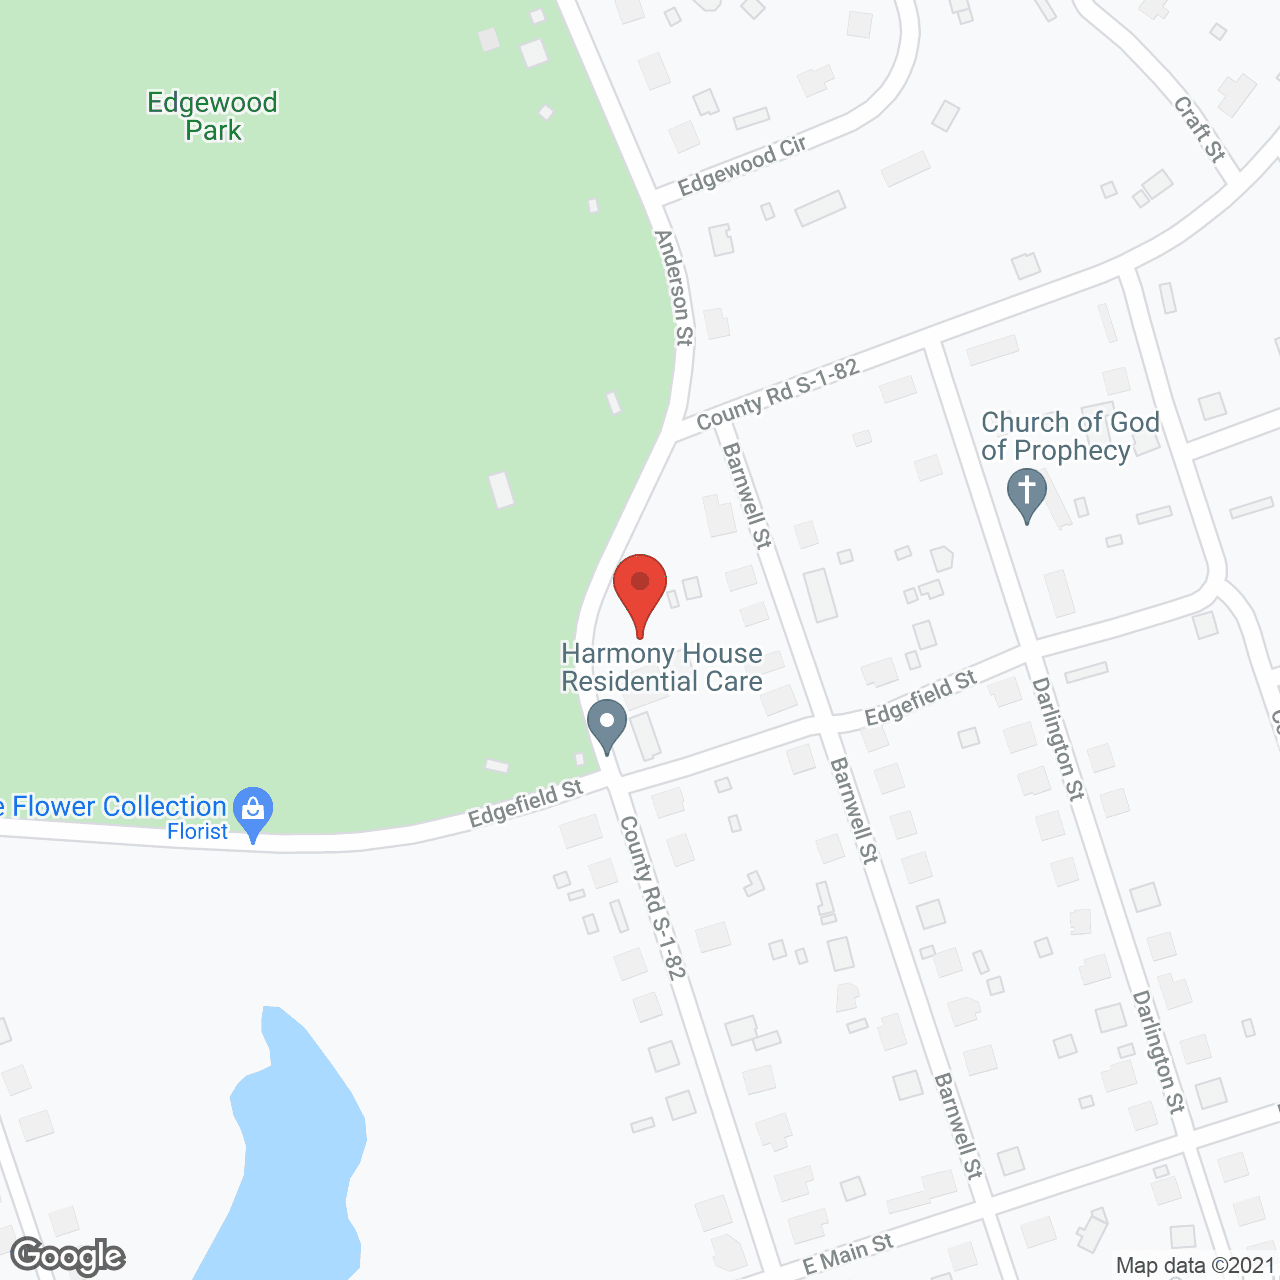 Harmony House Residential Care in google map